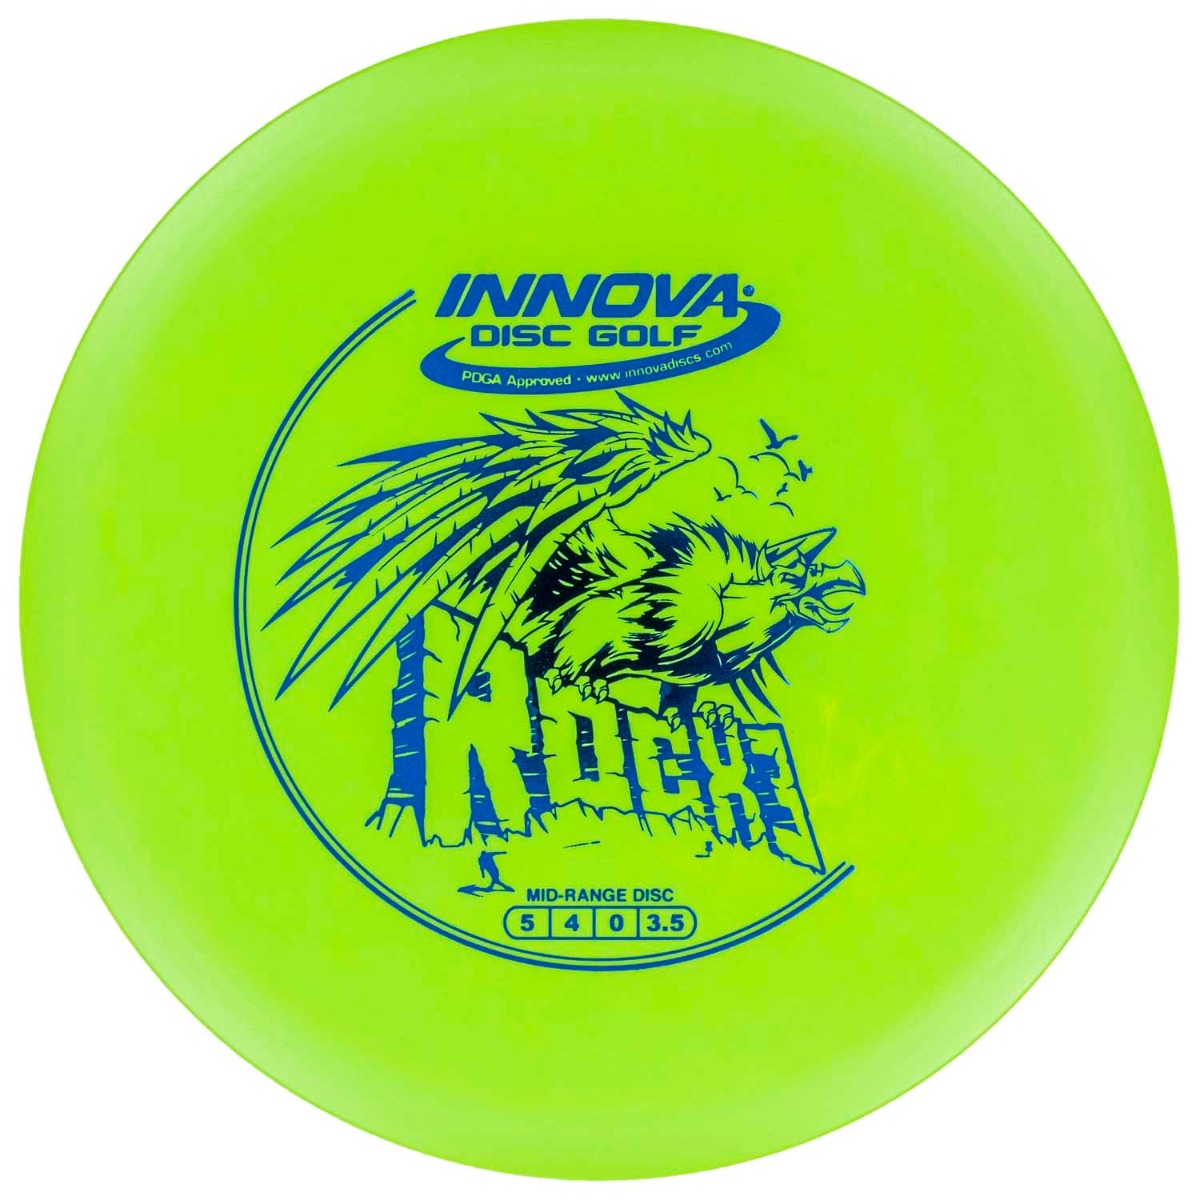 DX RocX3 from Disc Golf United